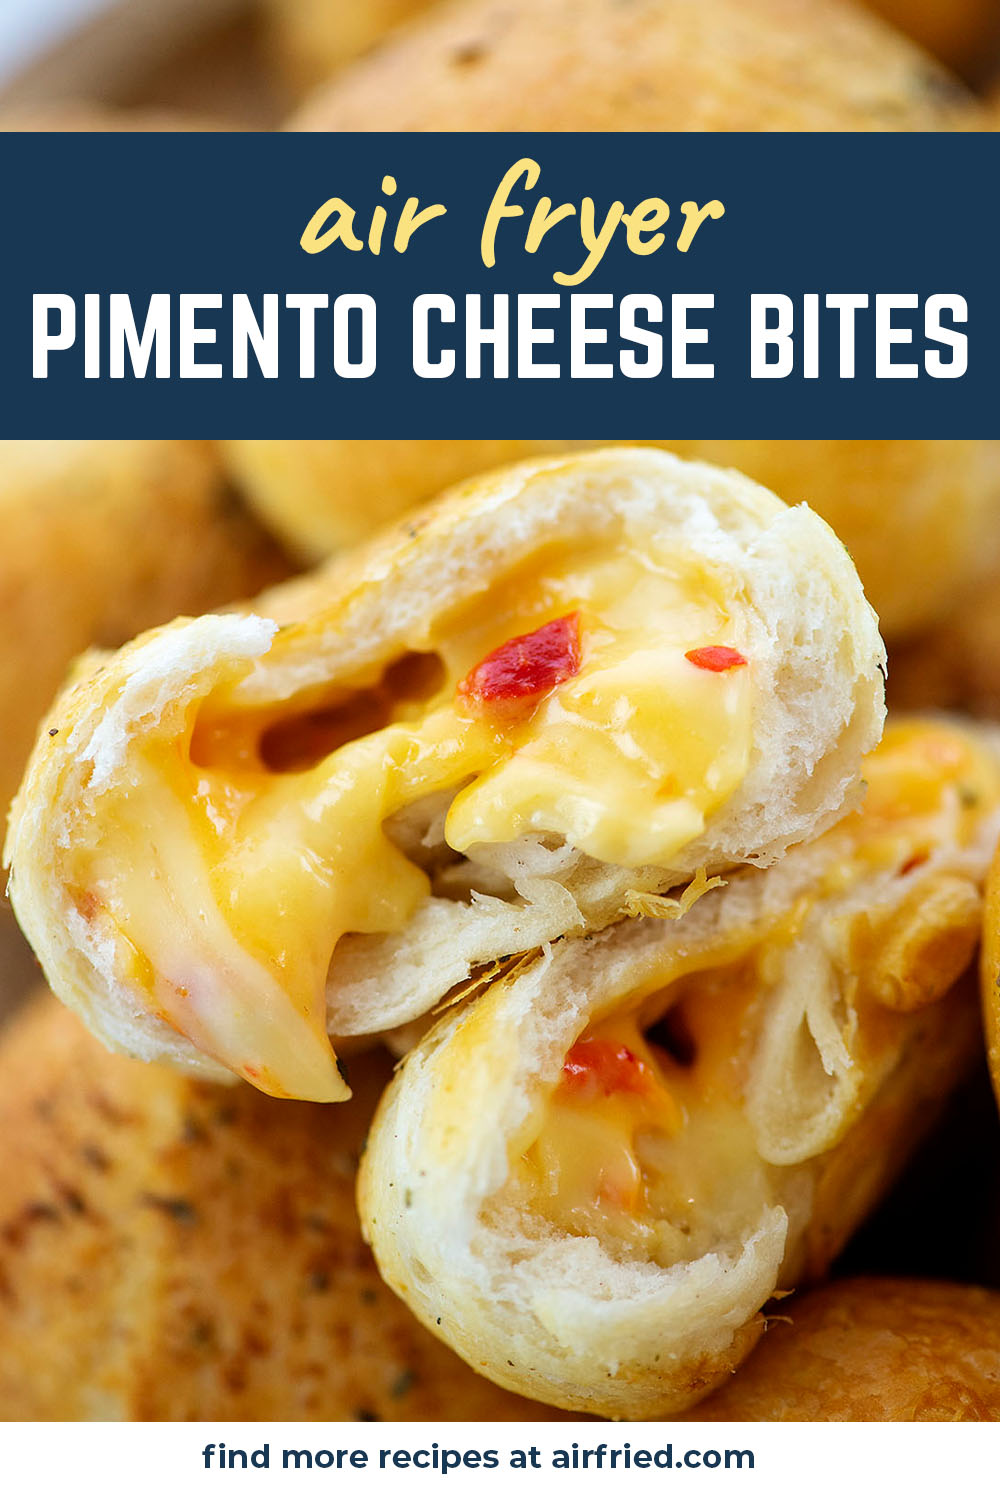 Theese rich, cheeesy pimento cheese bites are super easy to make in your air fryer!